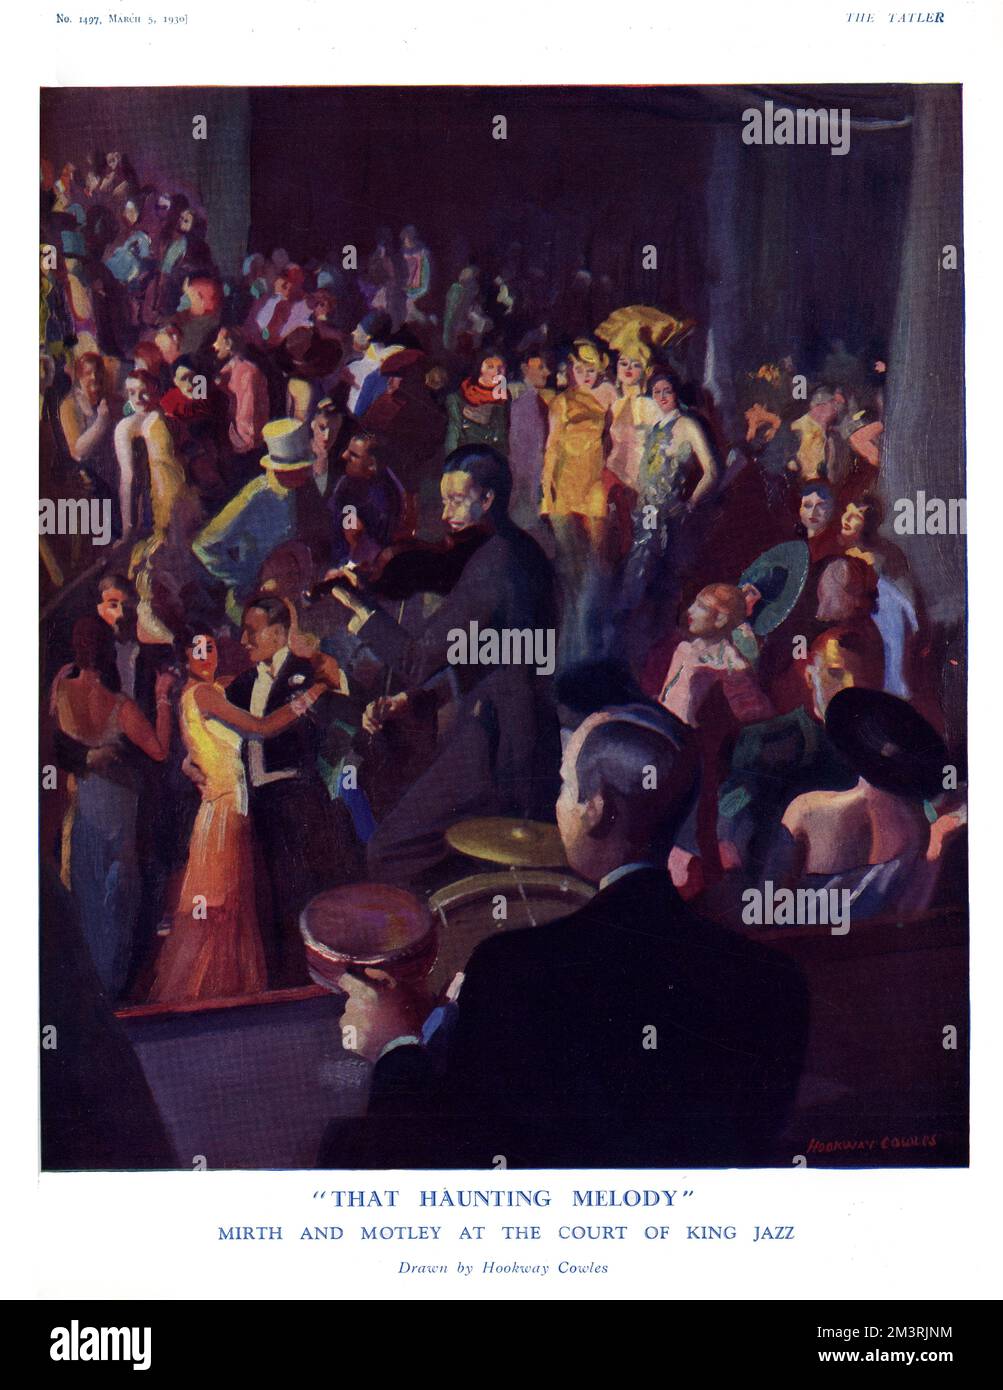 Mirth and motley at the court of King Jazz.  A jazz orchestra plays for people on the dance floor of a nightclub or restaurant.    1930 Stock Photo